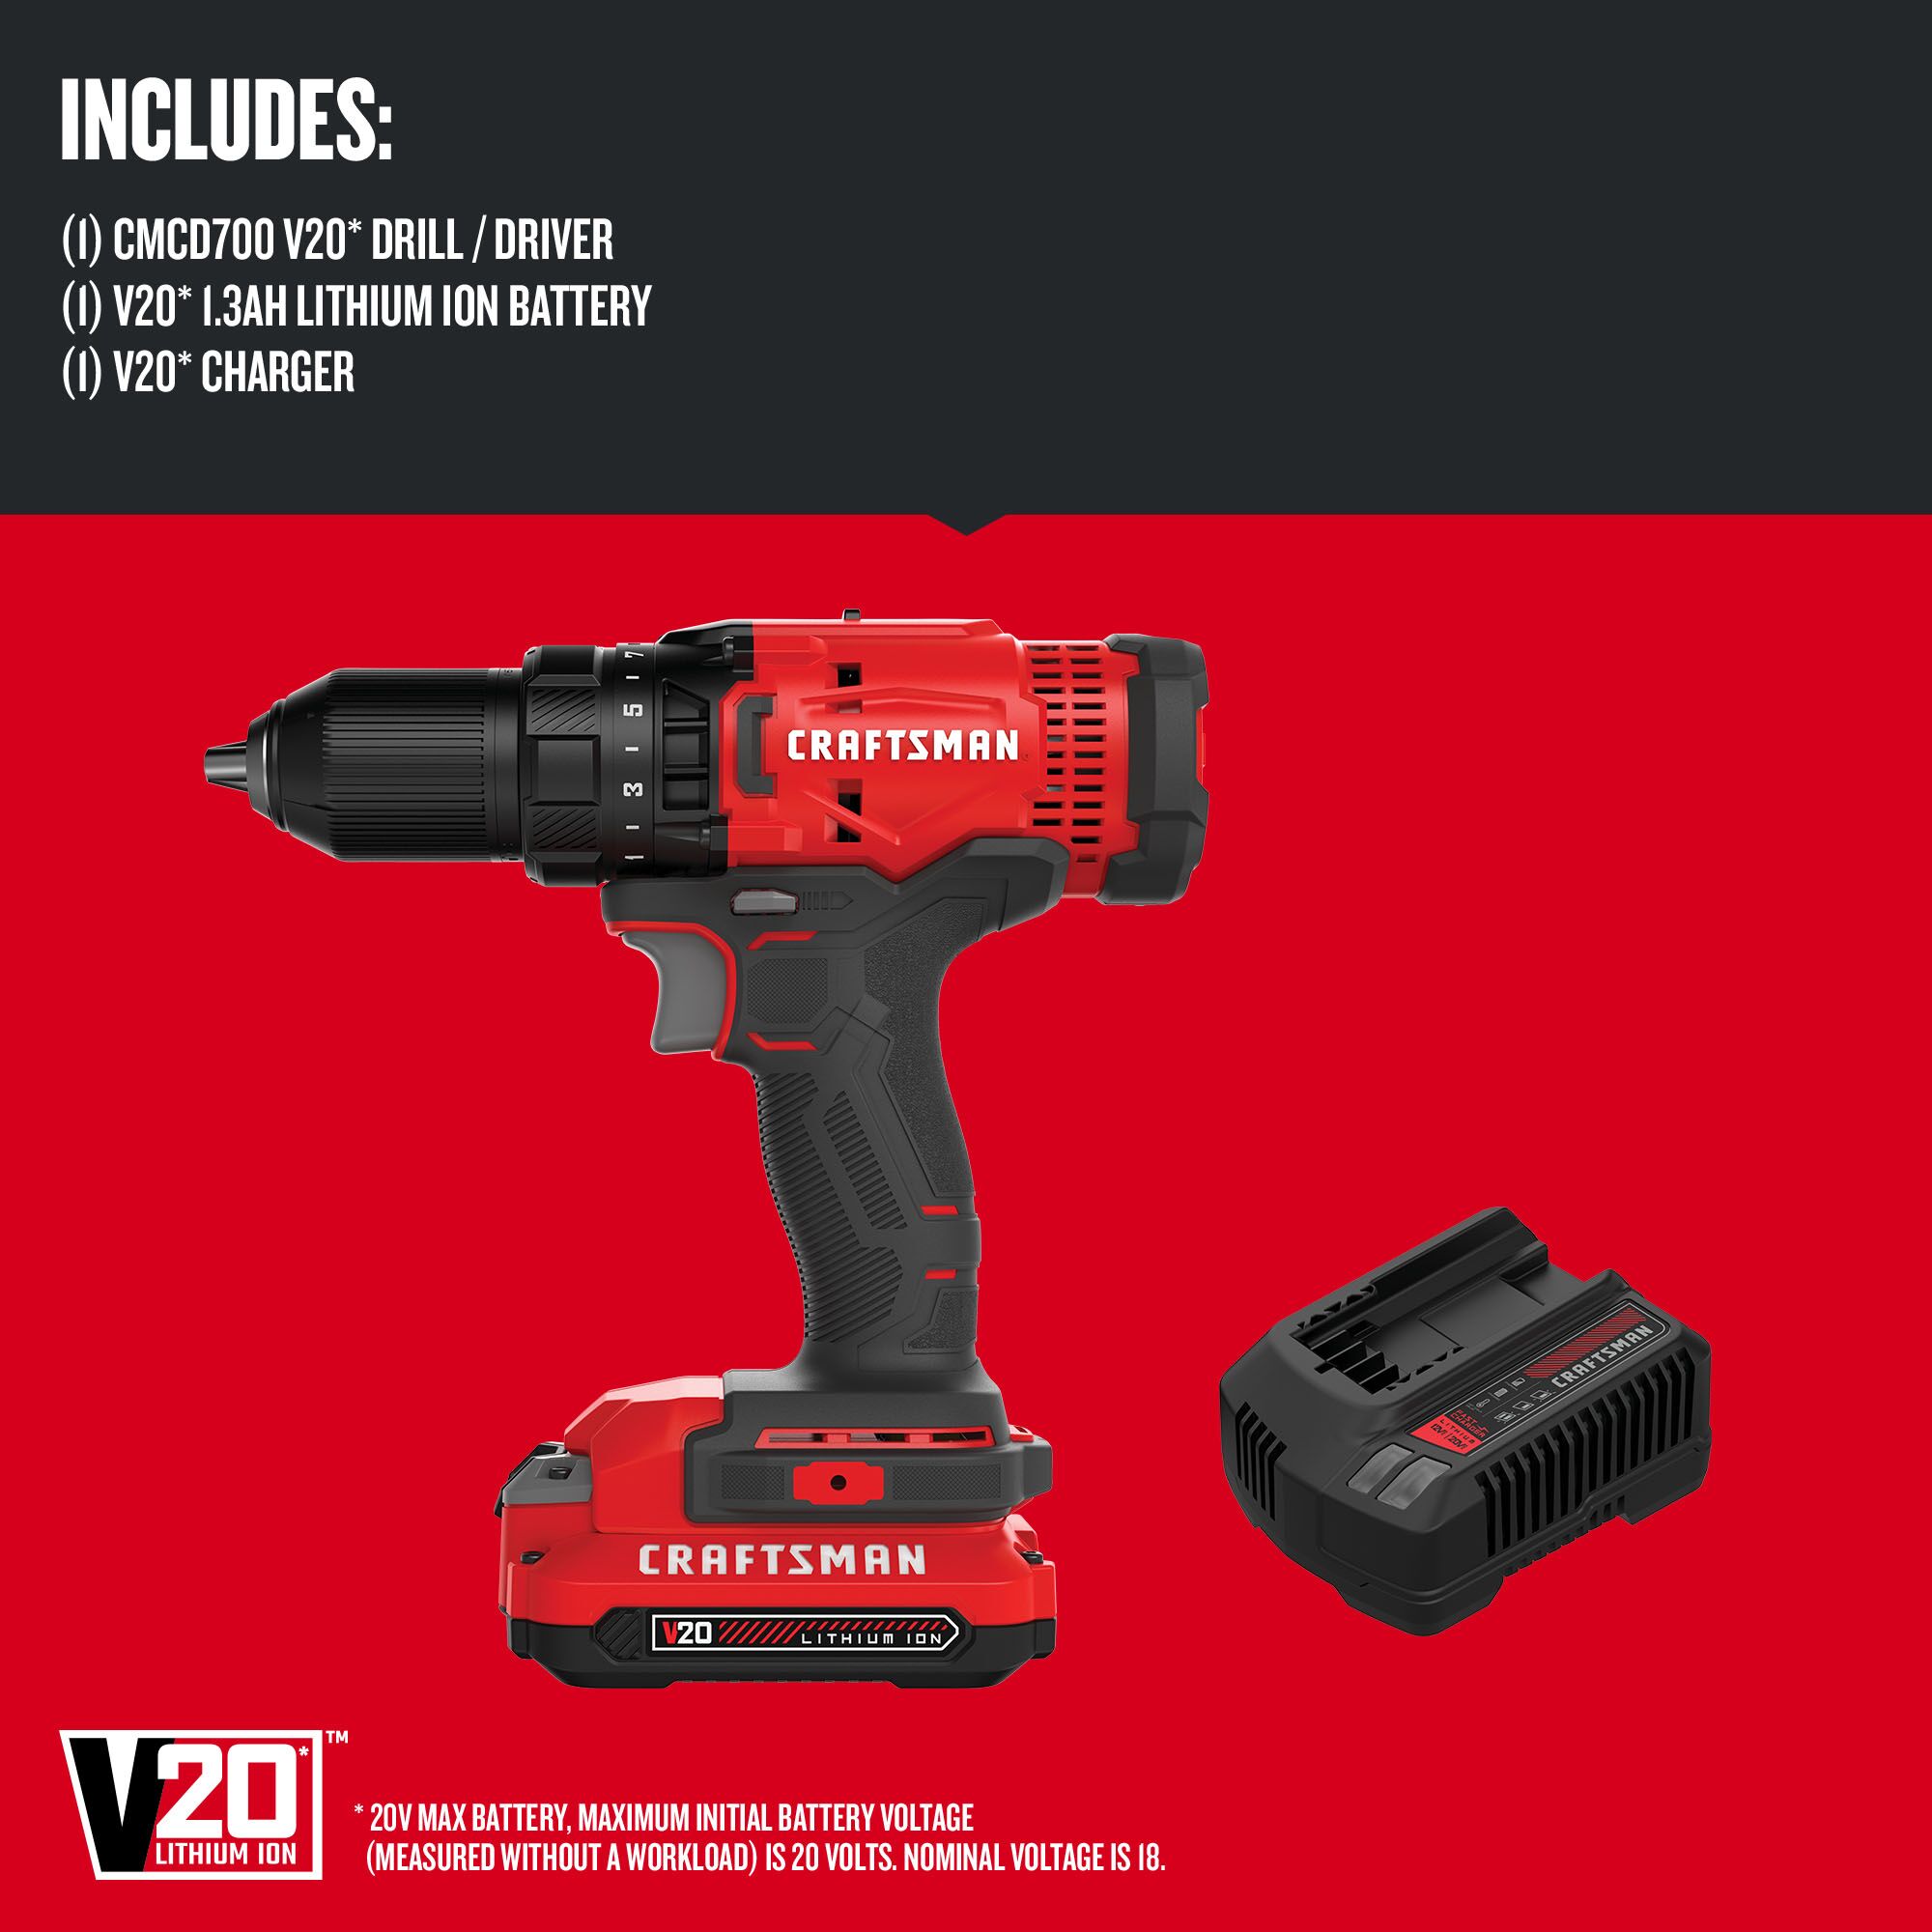 Graphic of CRAFTSMAN Drills: Compact highlighting product features